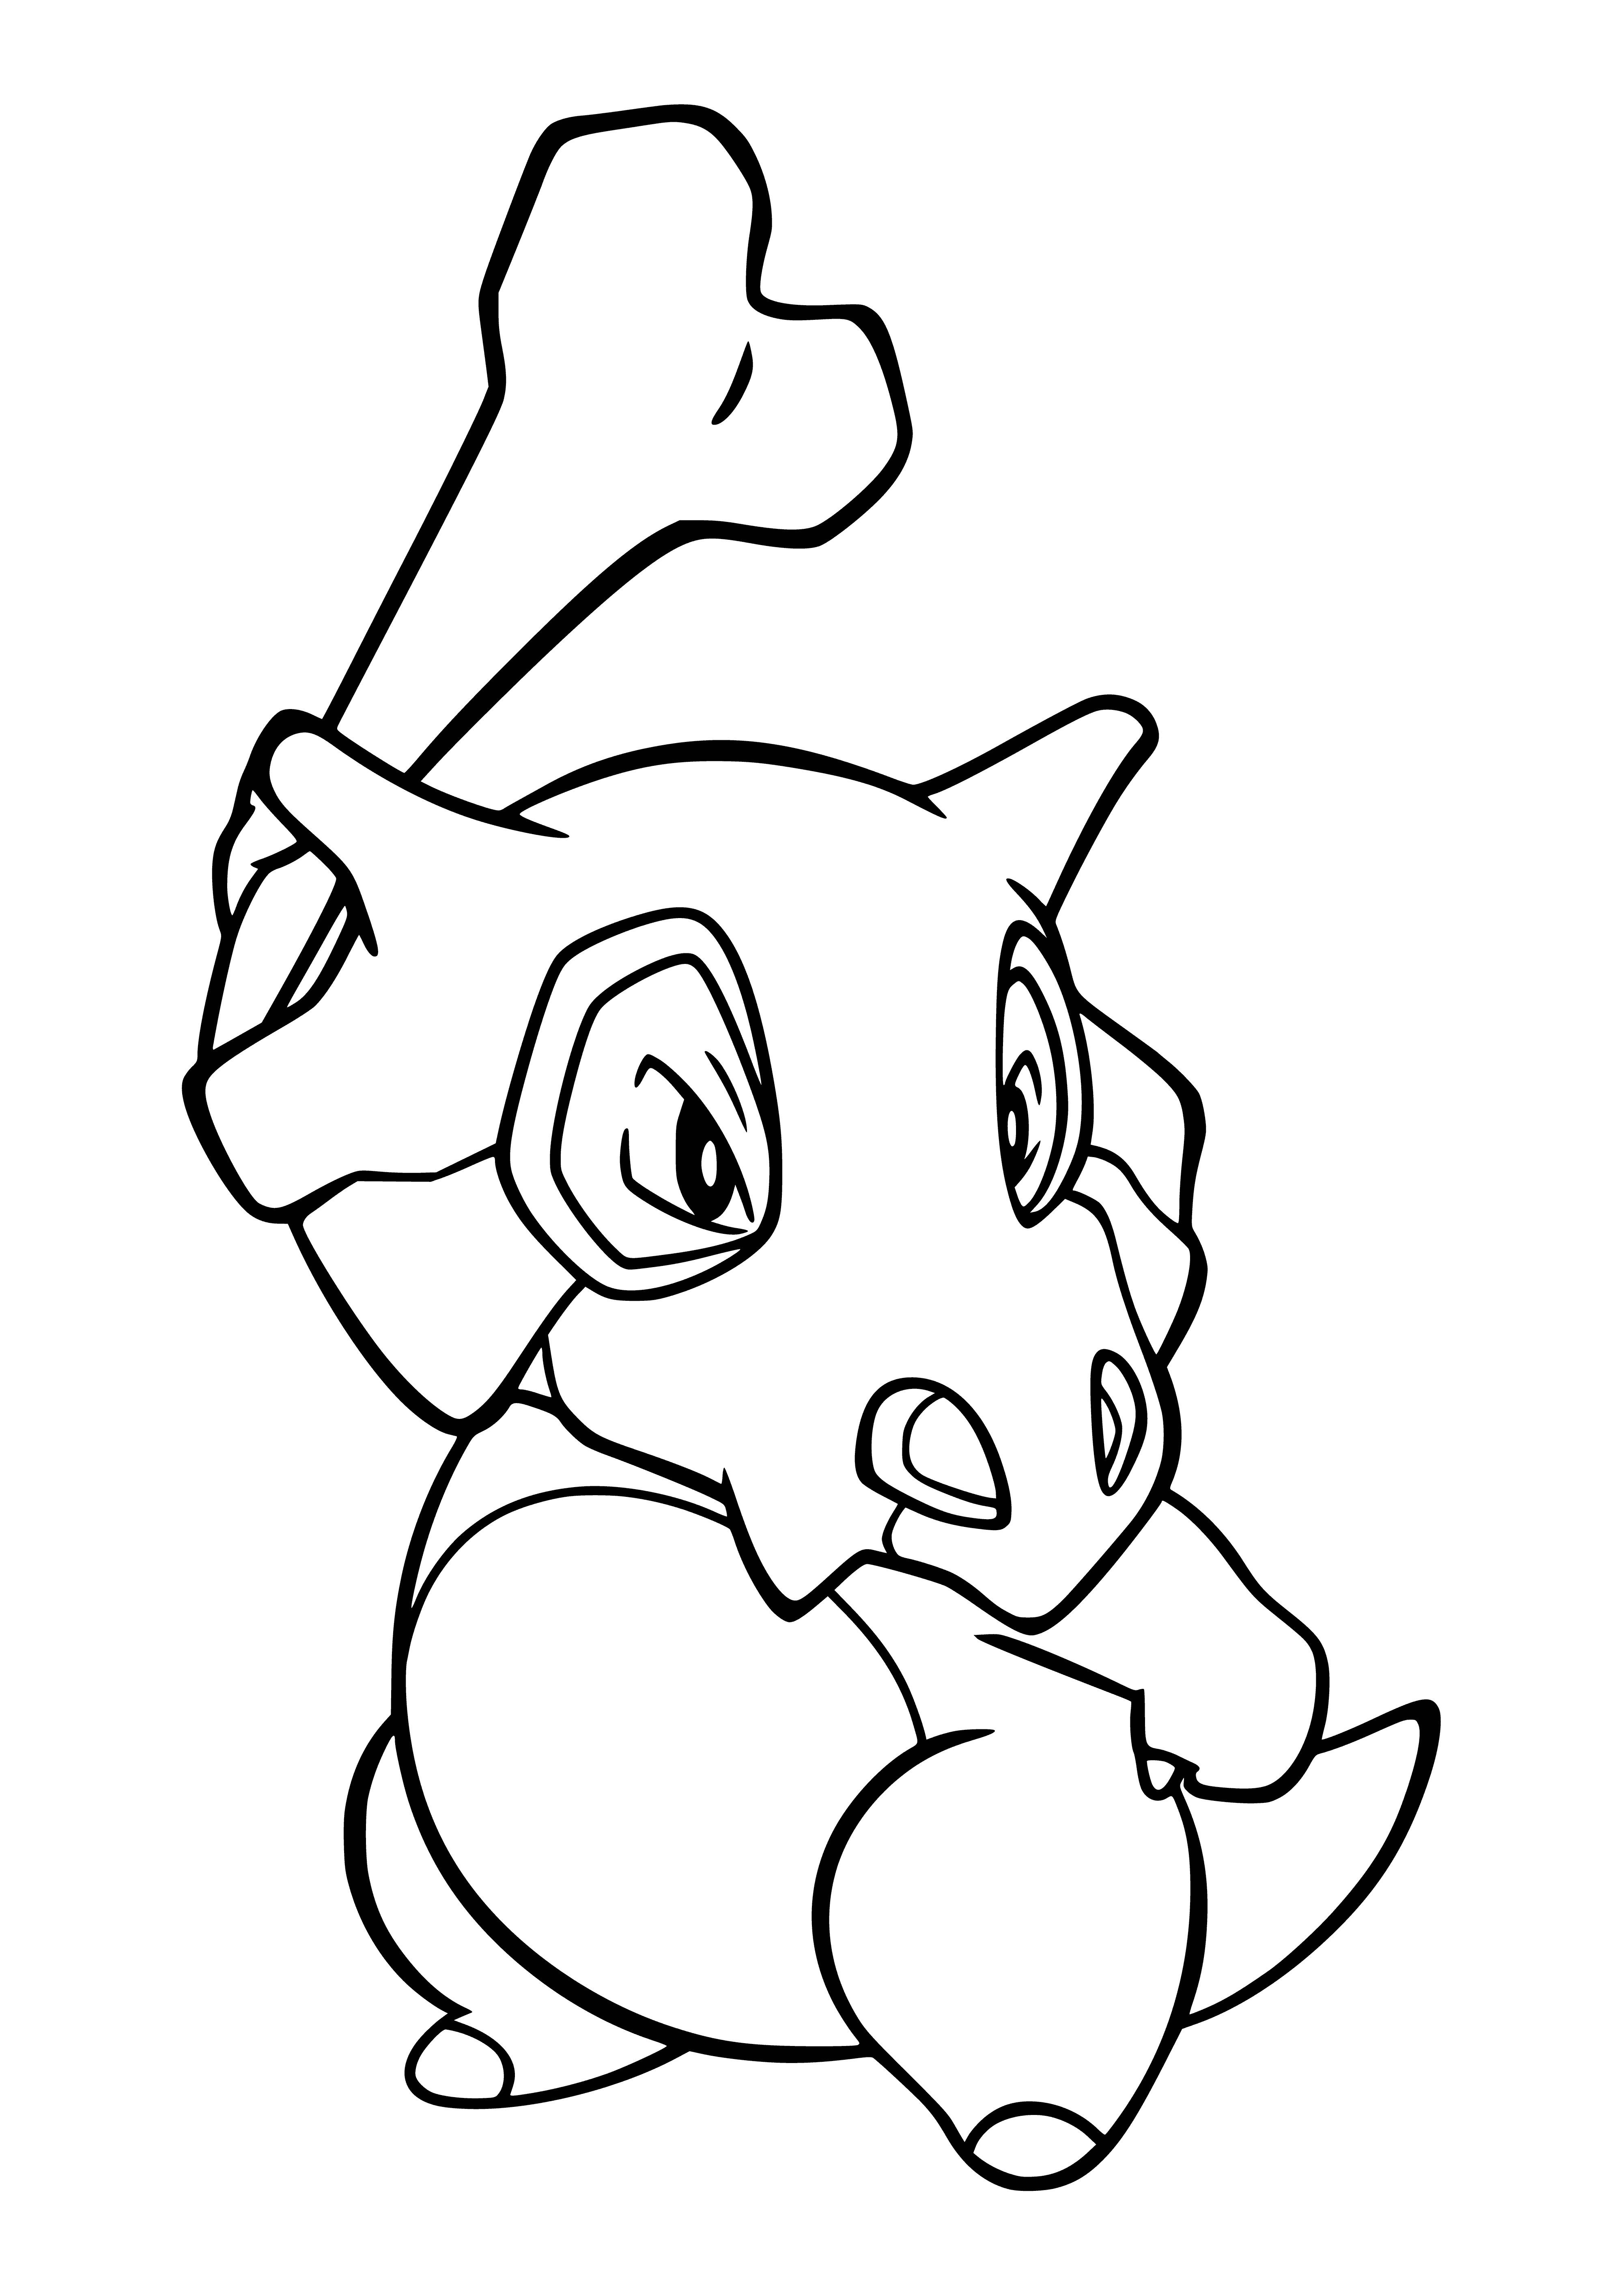 coloring page: Kubon is a small, lonesome Pokémon with a tough hide and brown fur to blend in & white bone head as a weapon/tool. It is the pre-evolved form of Marowak.